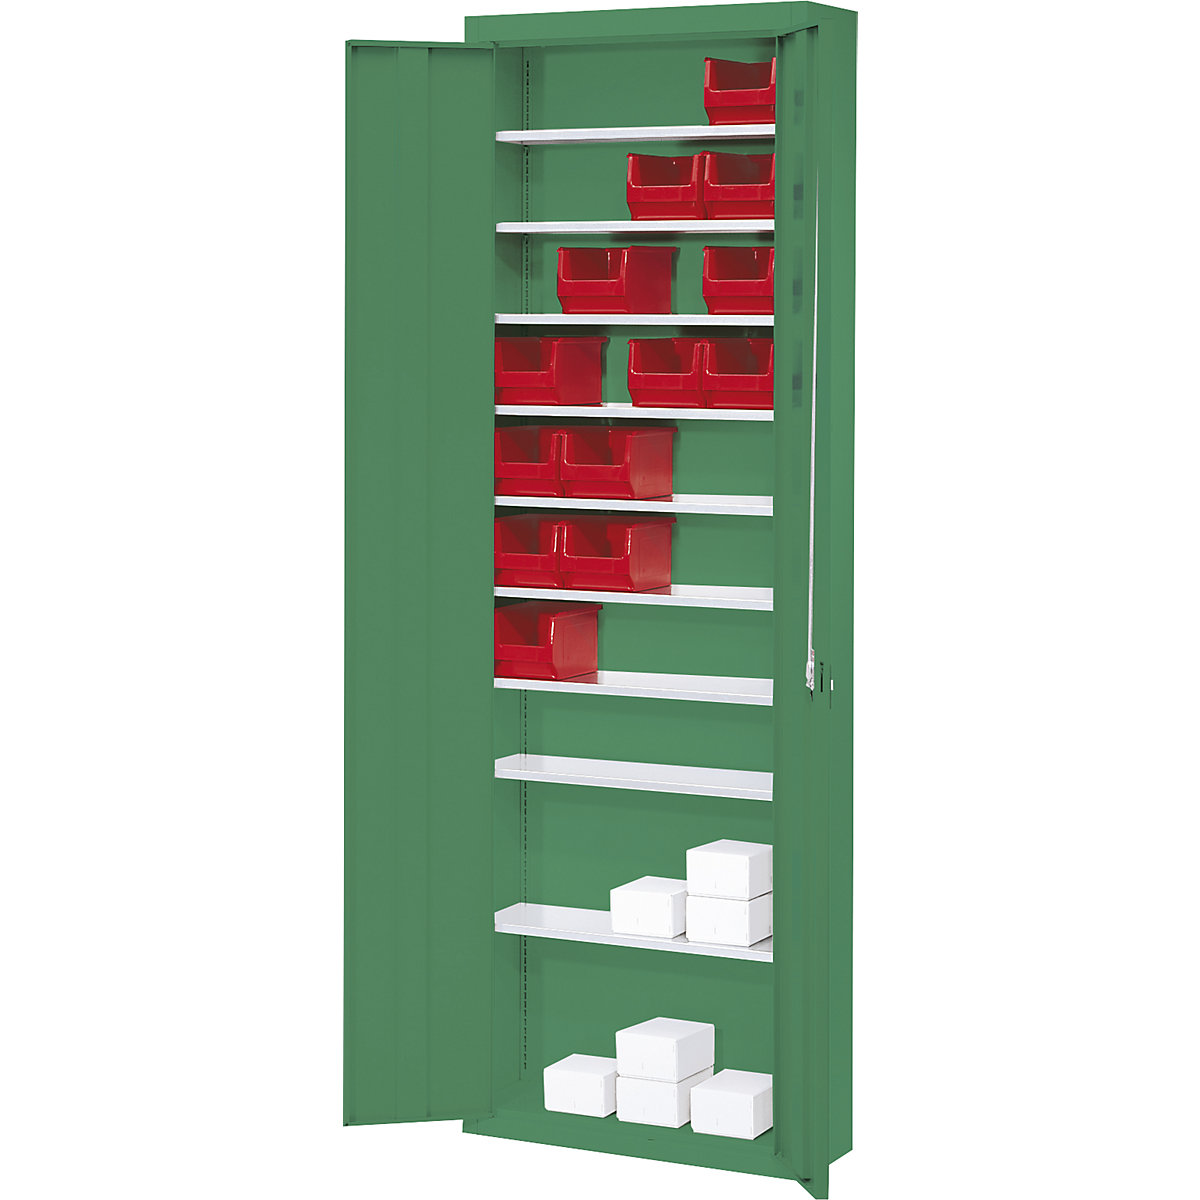 Storage cupboard, without open fronted storage bins – mauser, HxWxD 2150 x 680 x 280 mm, single colour, green-6